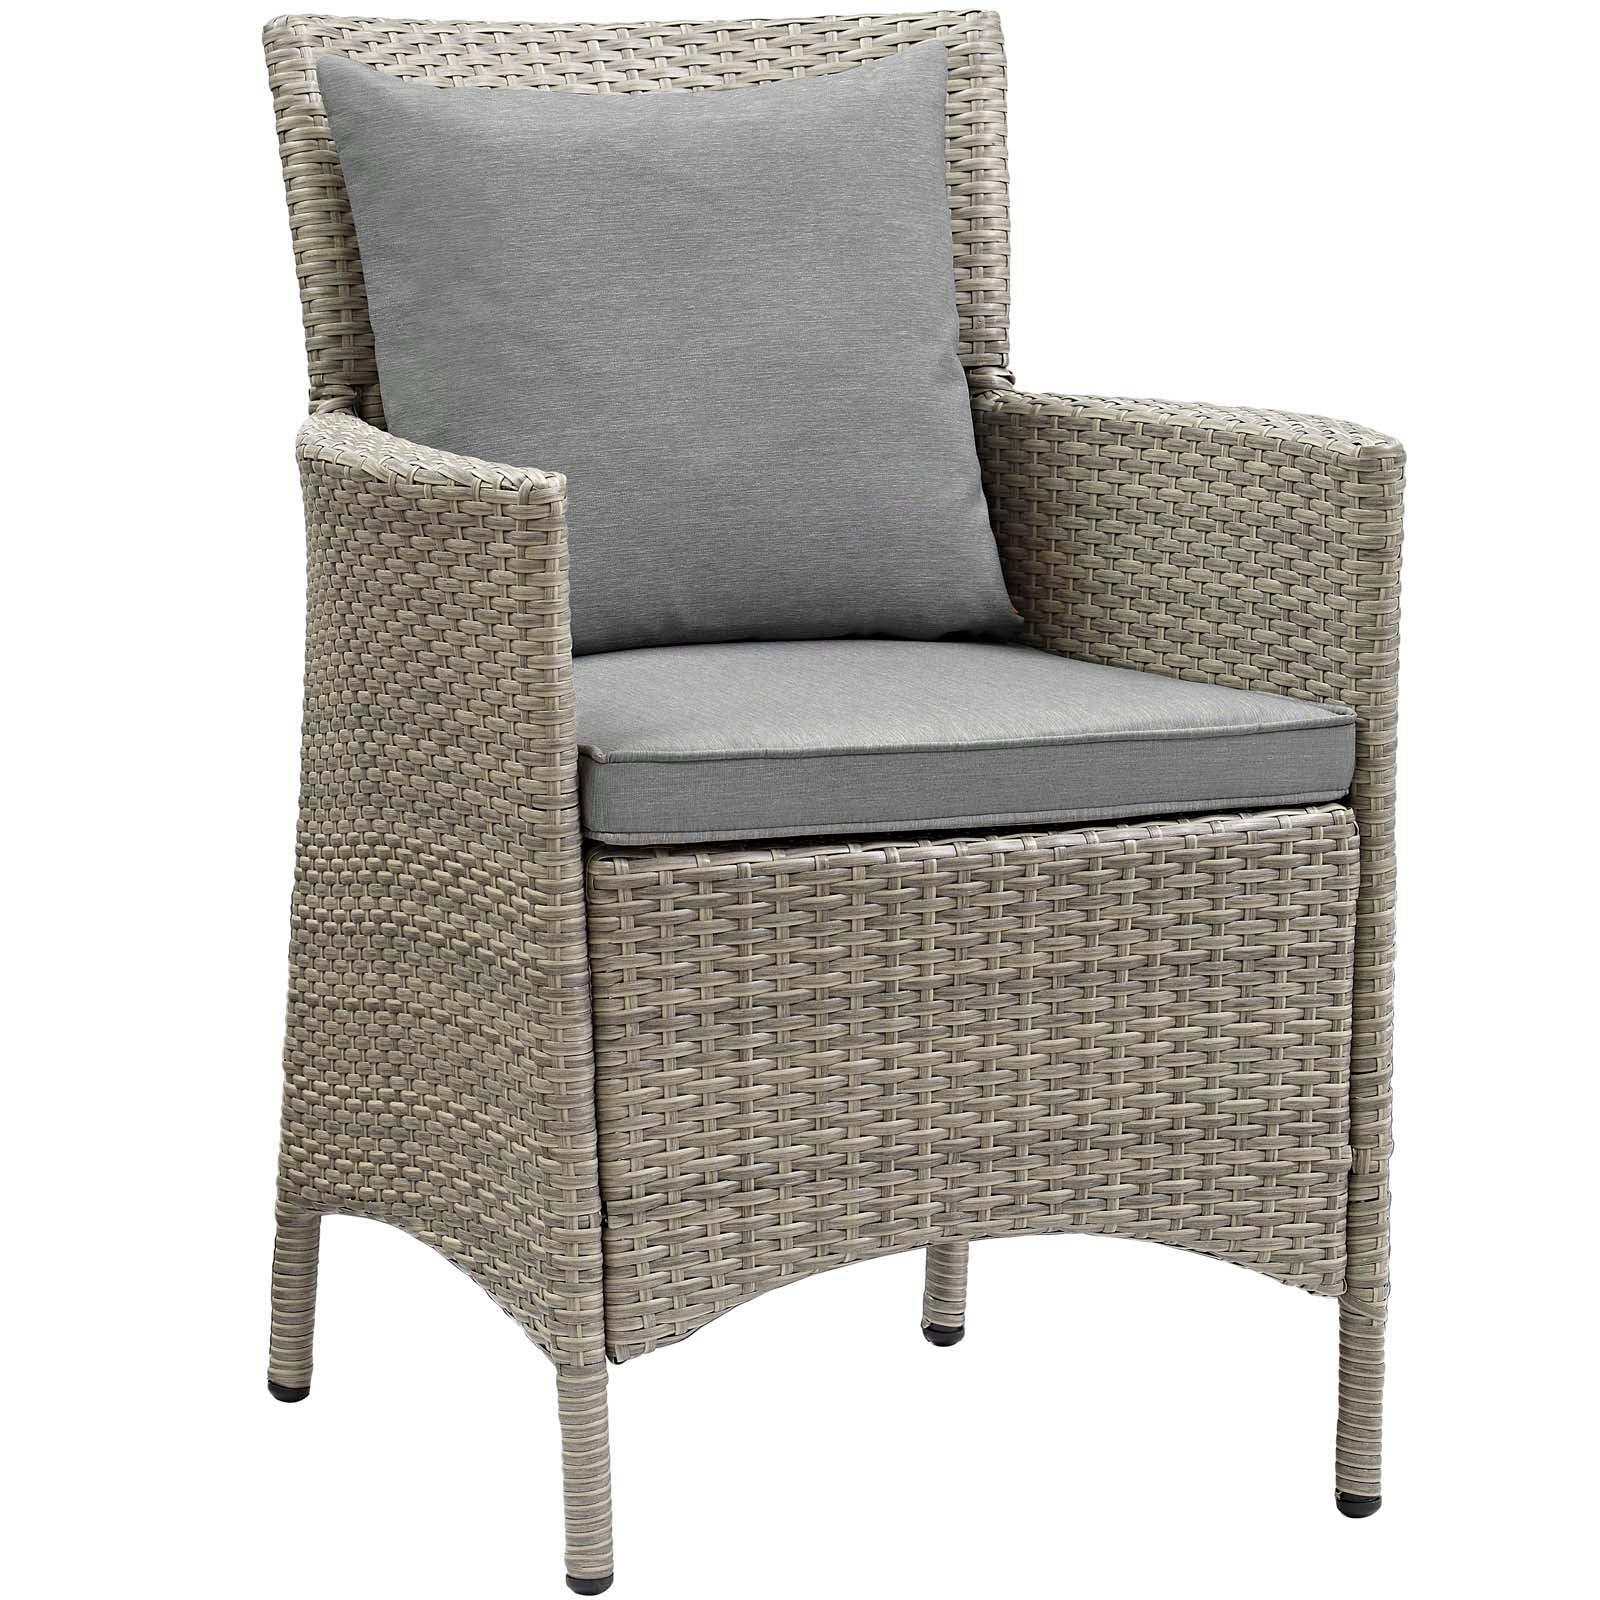 Modway Outdoor Dining Chairs - Conduit Outdoor Patio Wicker Rattan Dining Armchair (Set of 2) Light Gray